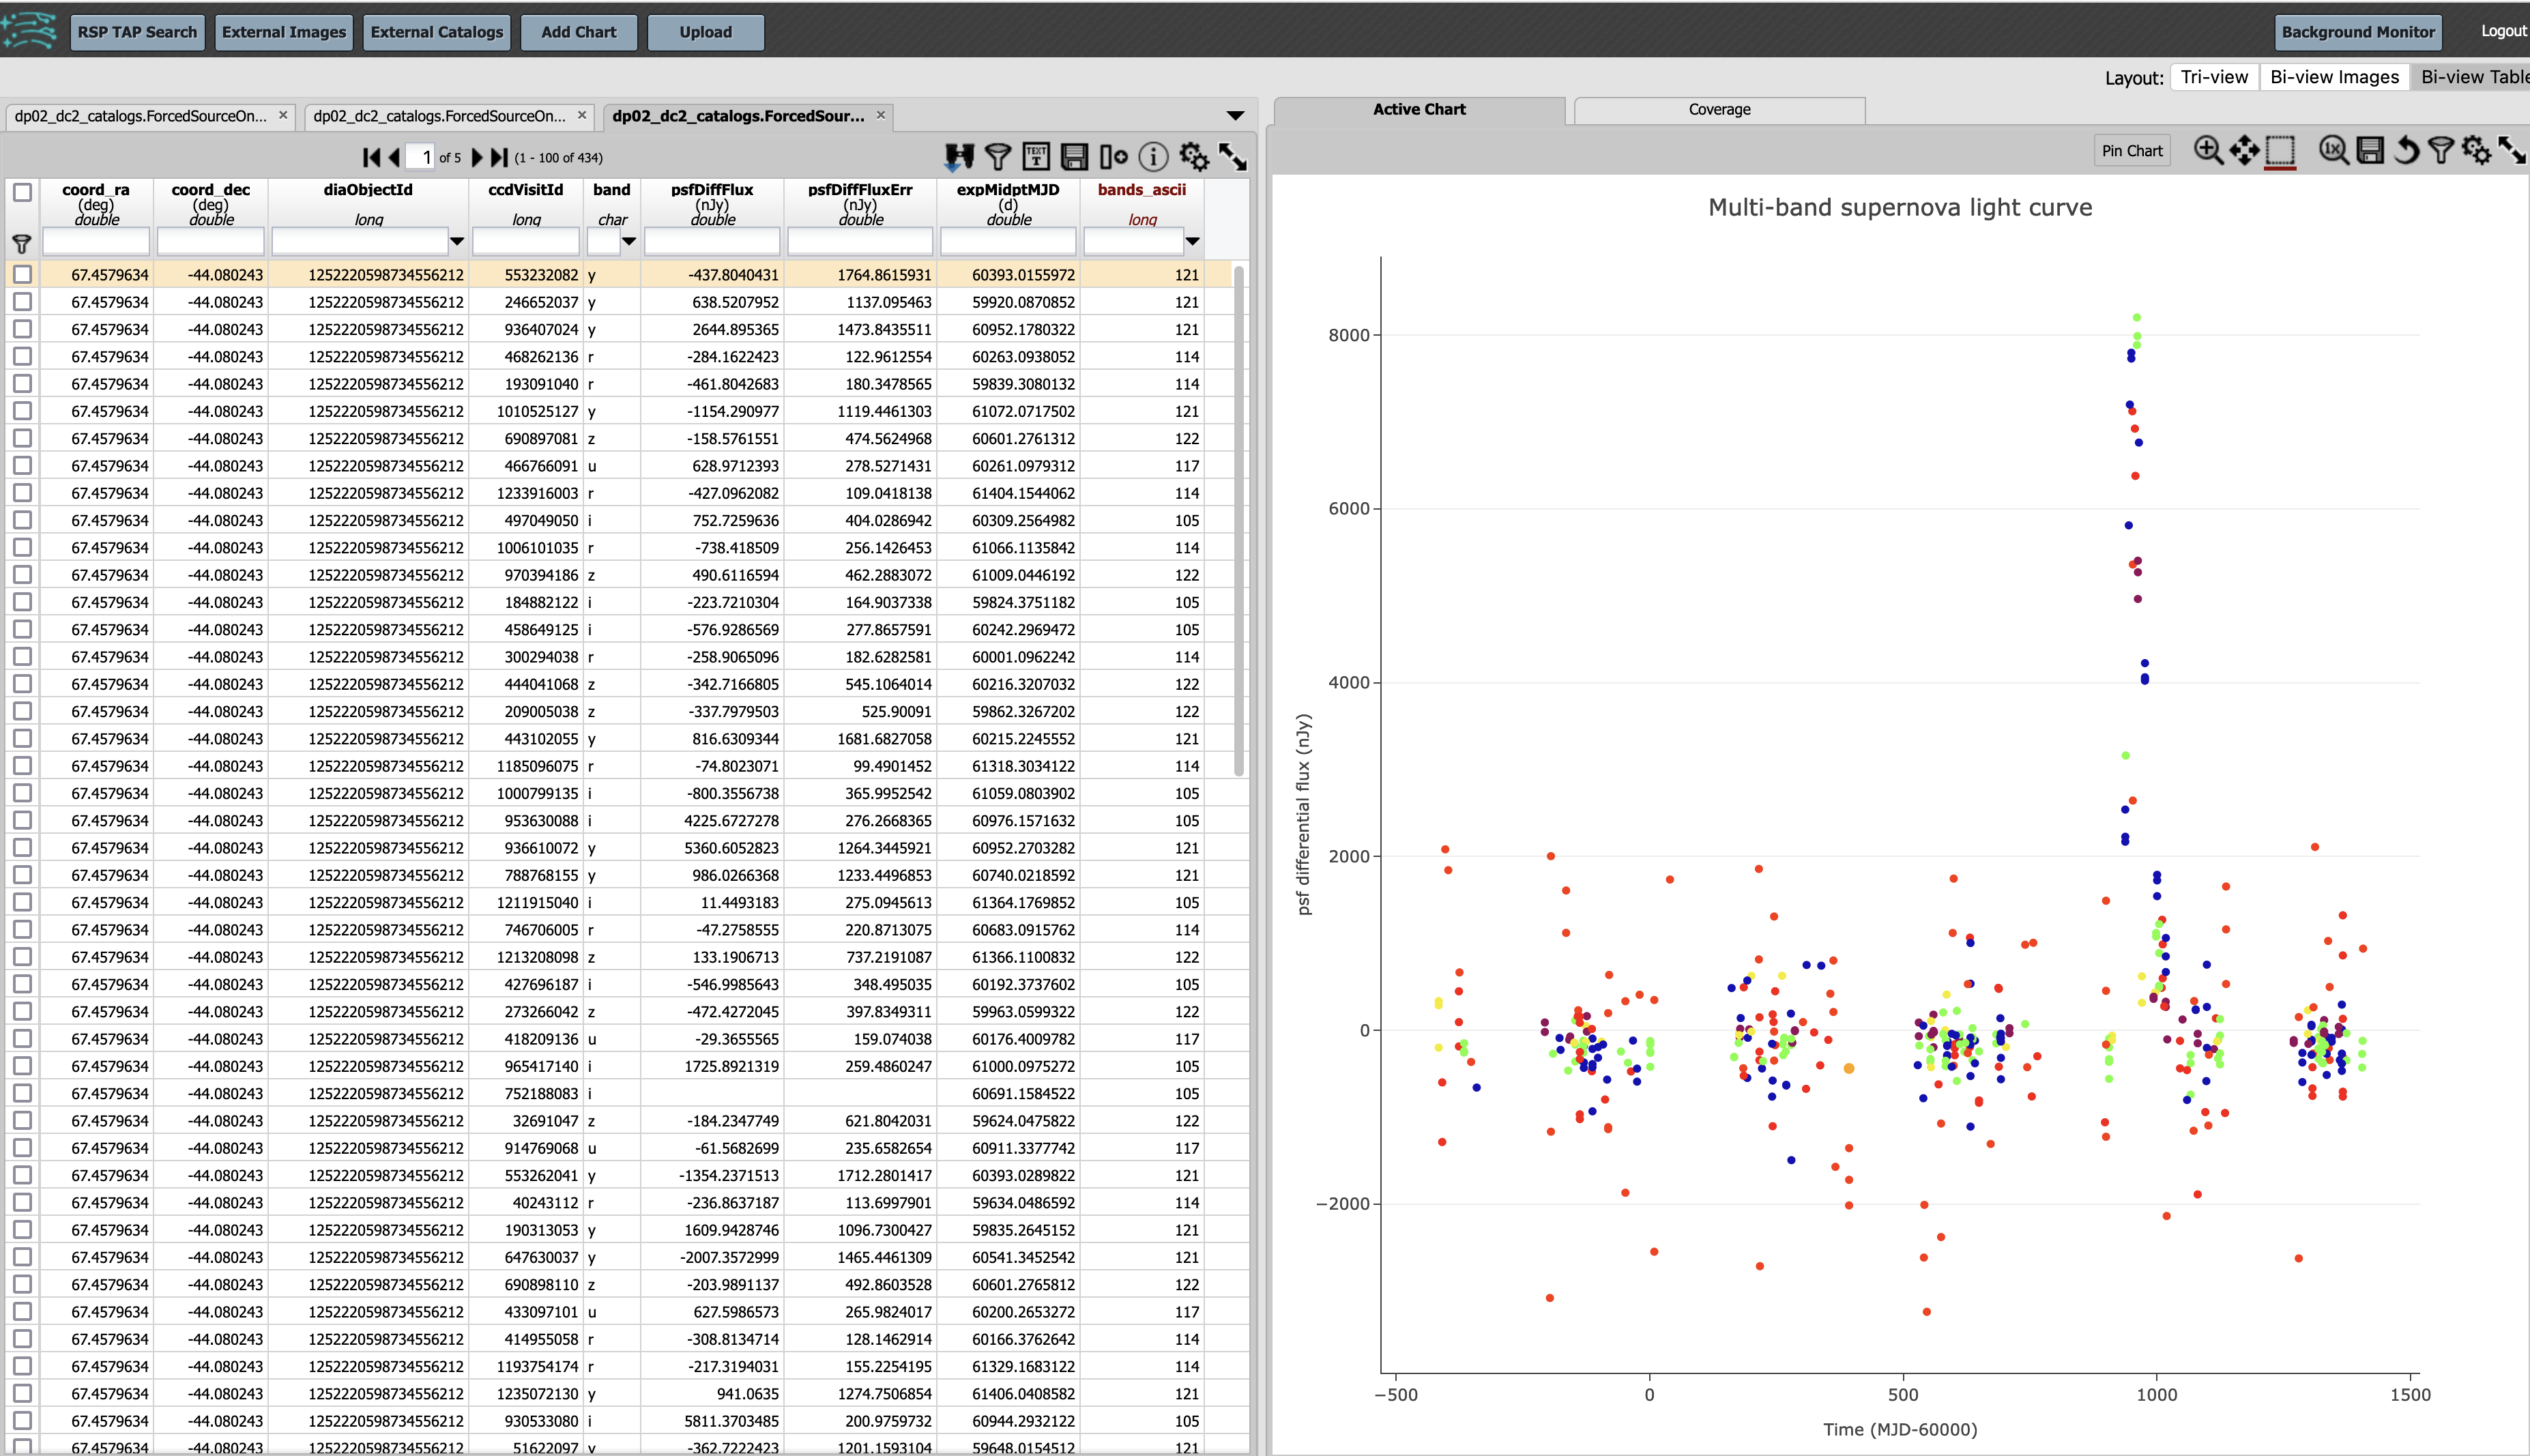 A screenshot of the results table and the multi-band lightcurve with points colored by band.